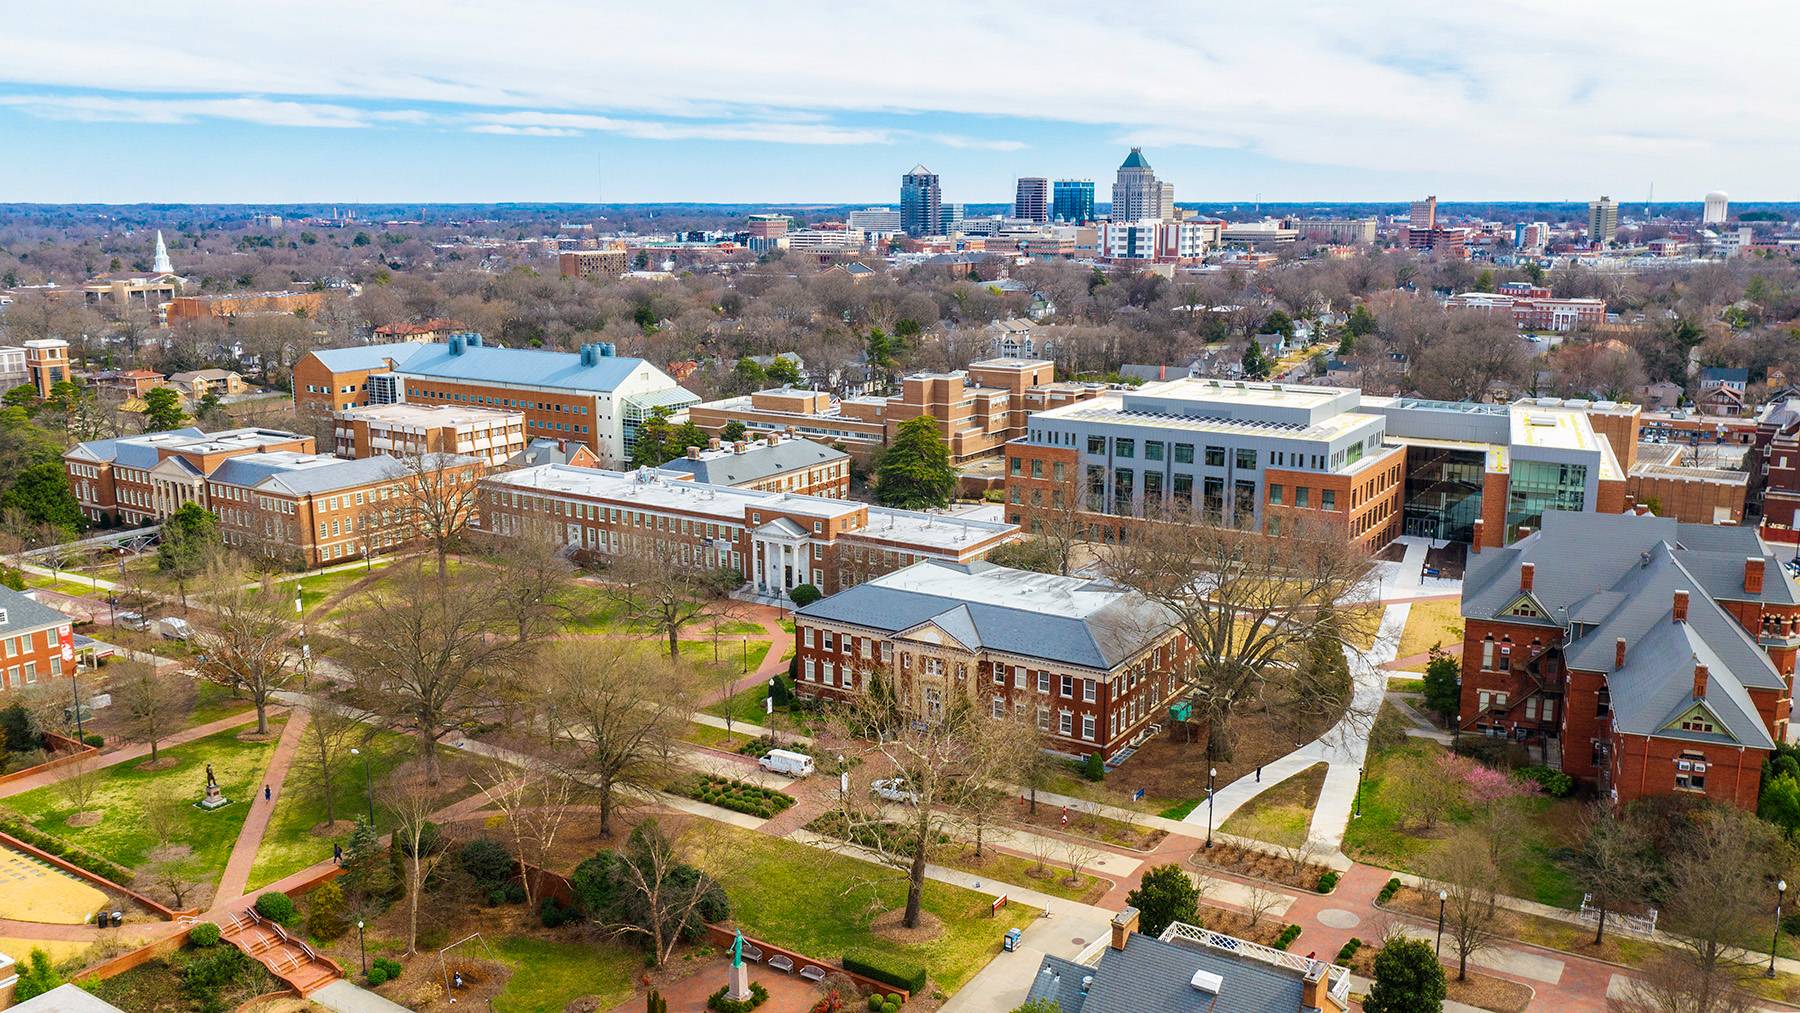 An aerial photo shows the UNCG campus with bare trees during winter, with College Avenue in the foreground and the downtown Greensboro skyline in the background.